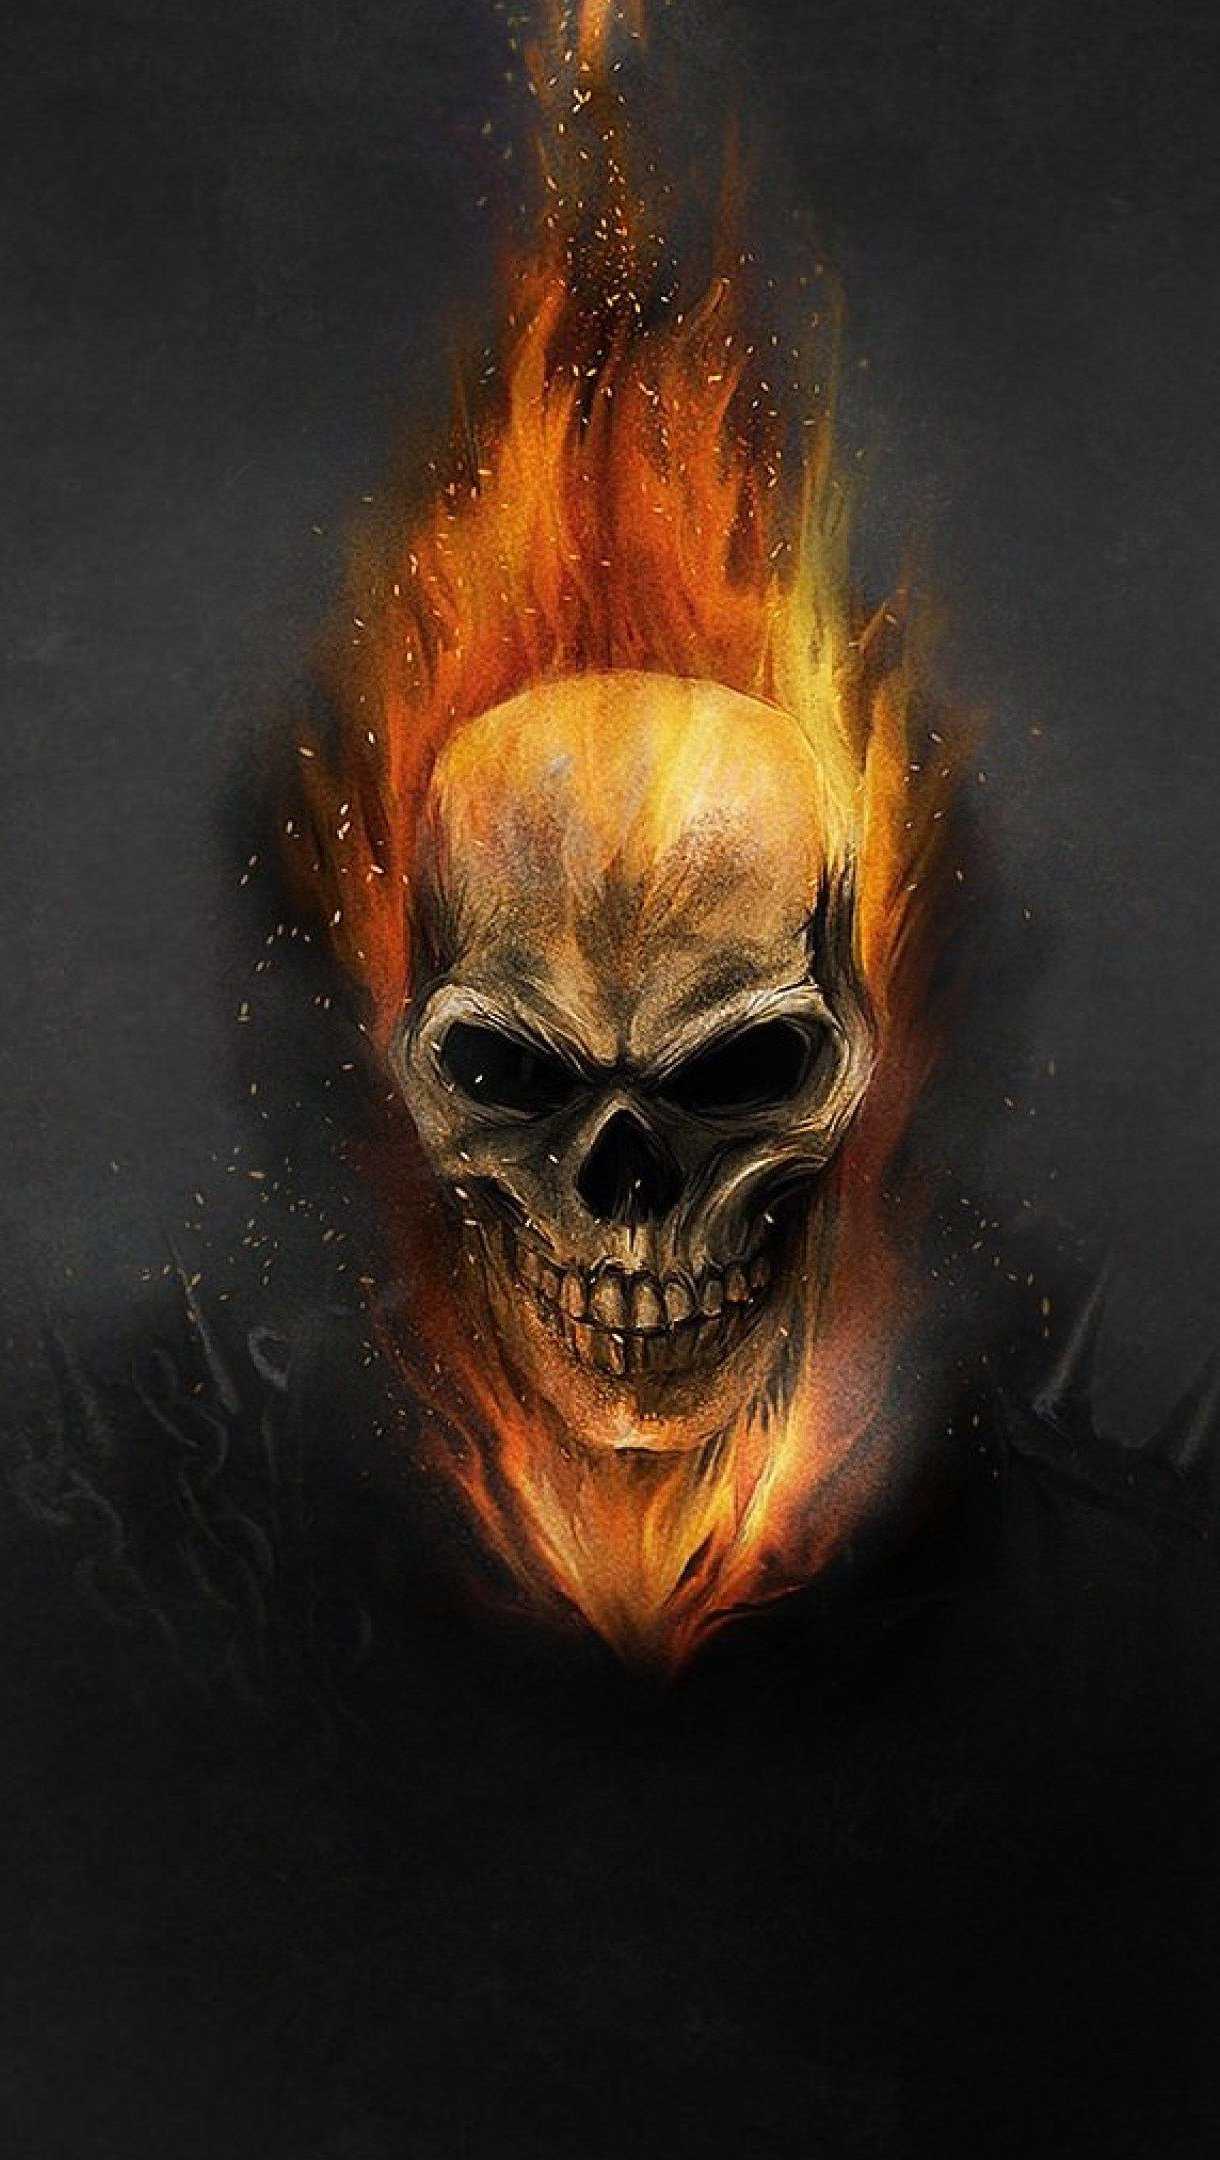 Ghost Rider Wallpaper - KoLPaPer - Awesome Free HD Wallpapers